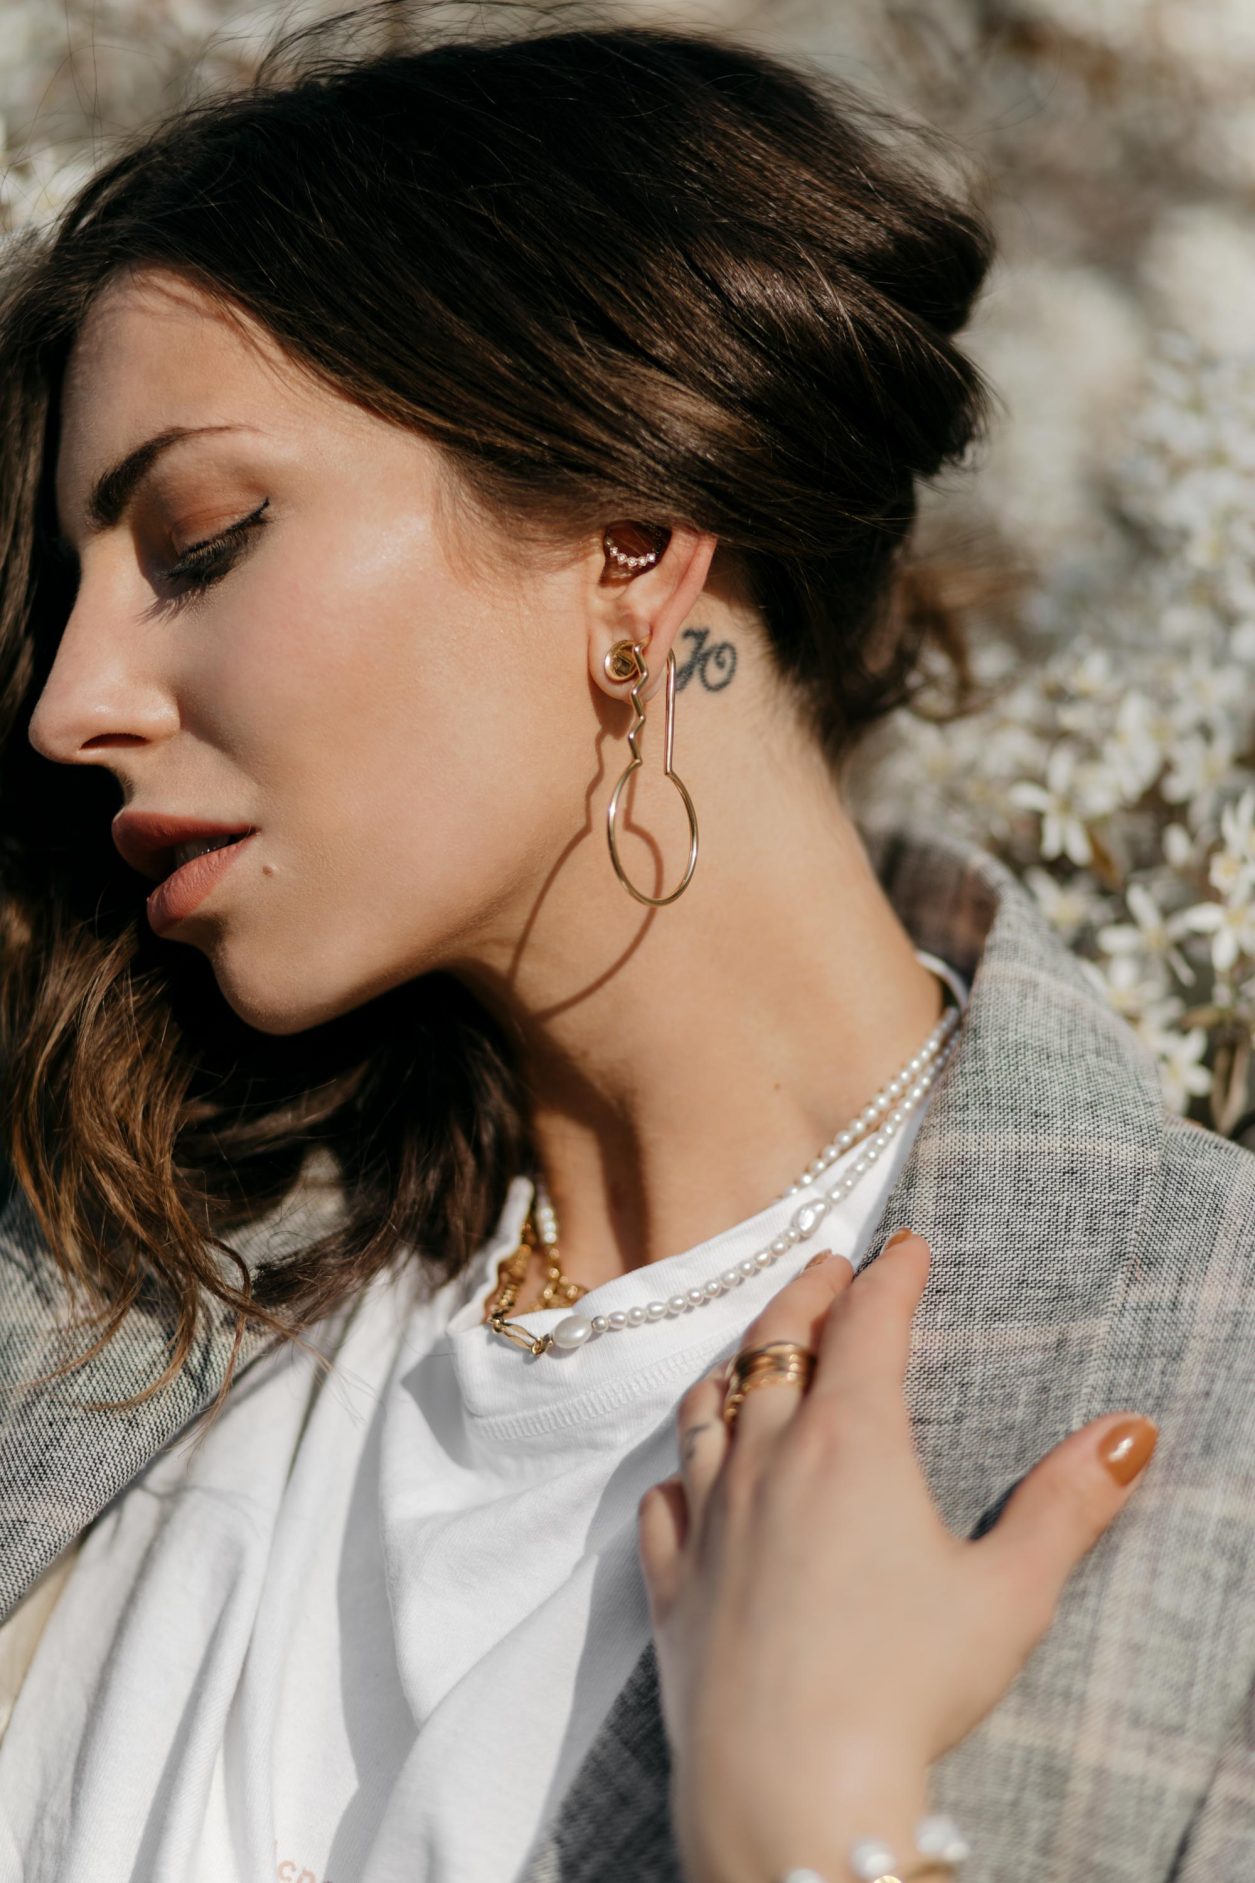 Portrait by Masha Sedgwick | Spring summer jewelry editorial | Wearing large single earring by Maria Black, pearl necklace by Maria Black